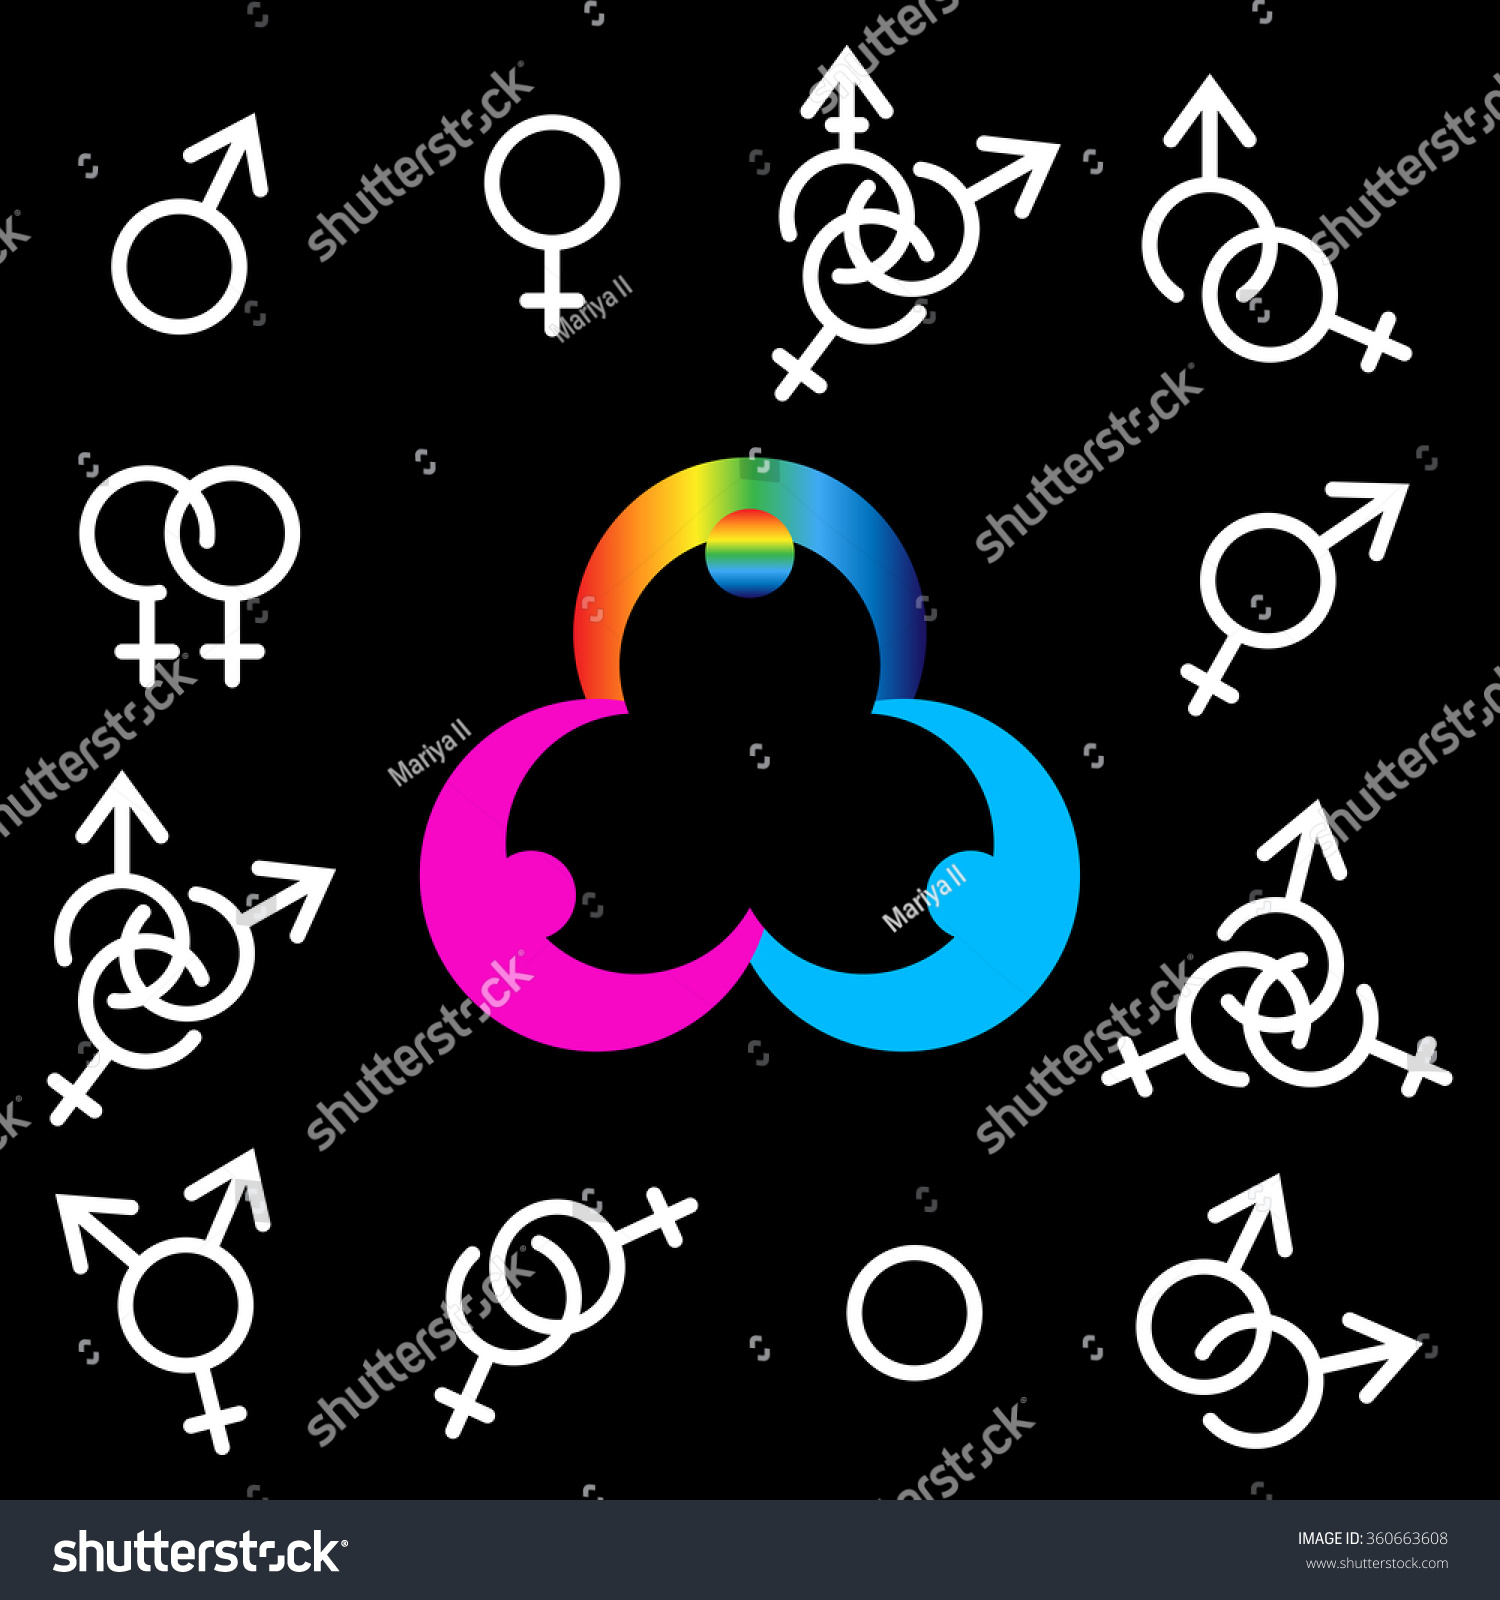 Sexual Orientation Symbol Icons Stock Vector Royalty Free 360663608 